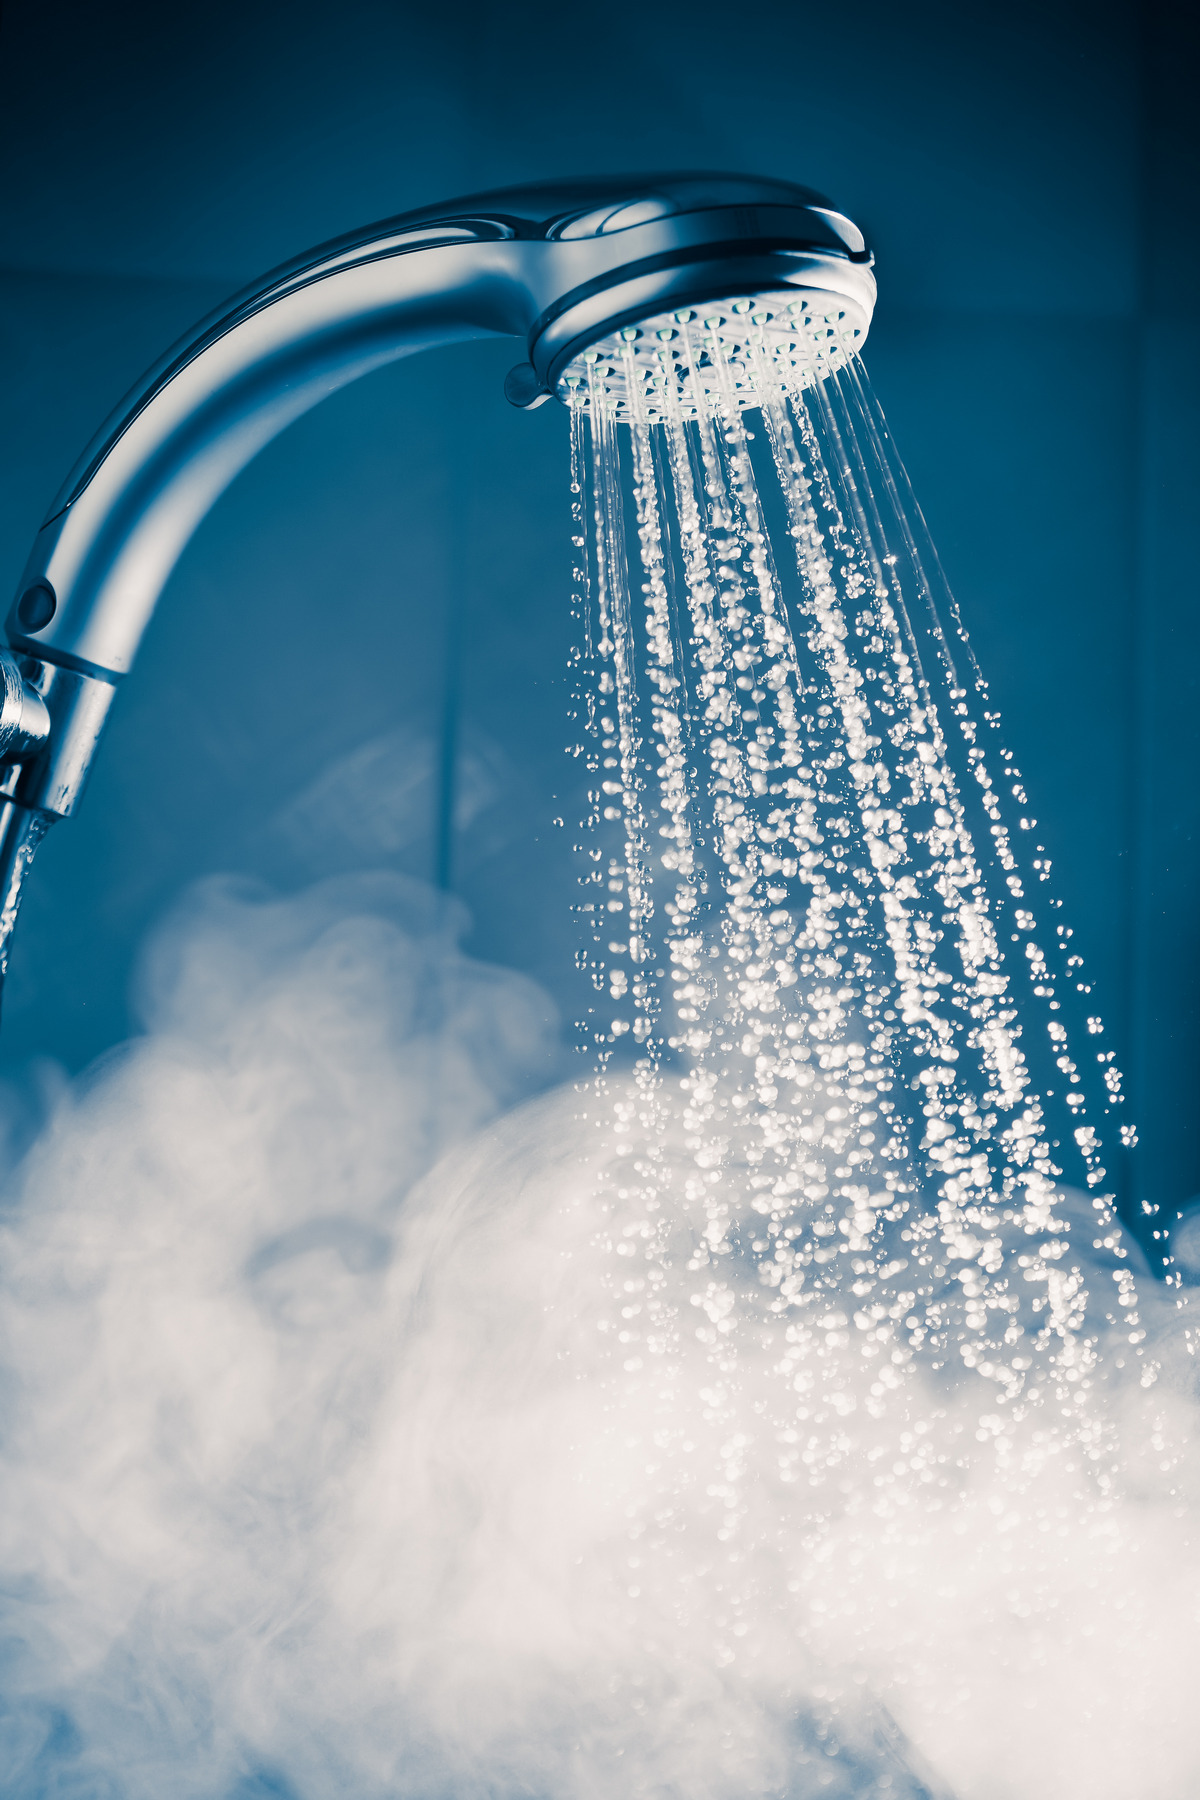 Avoid showering with hot water